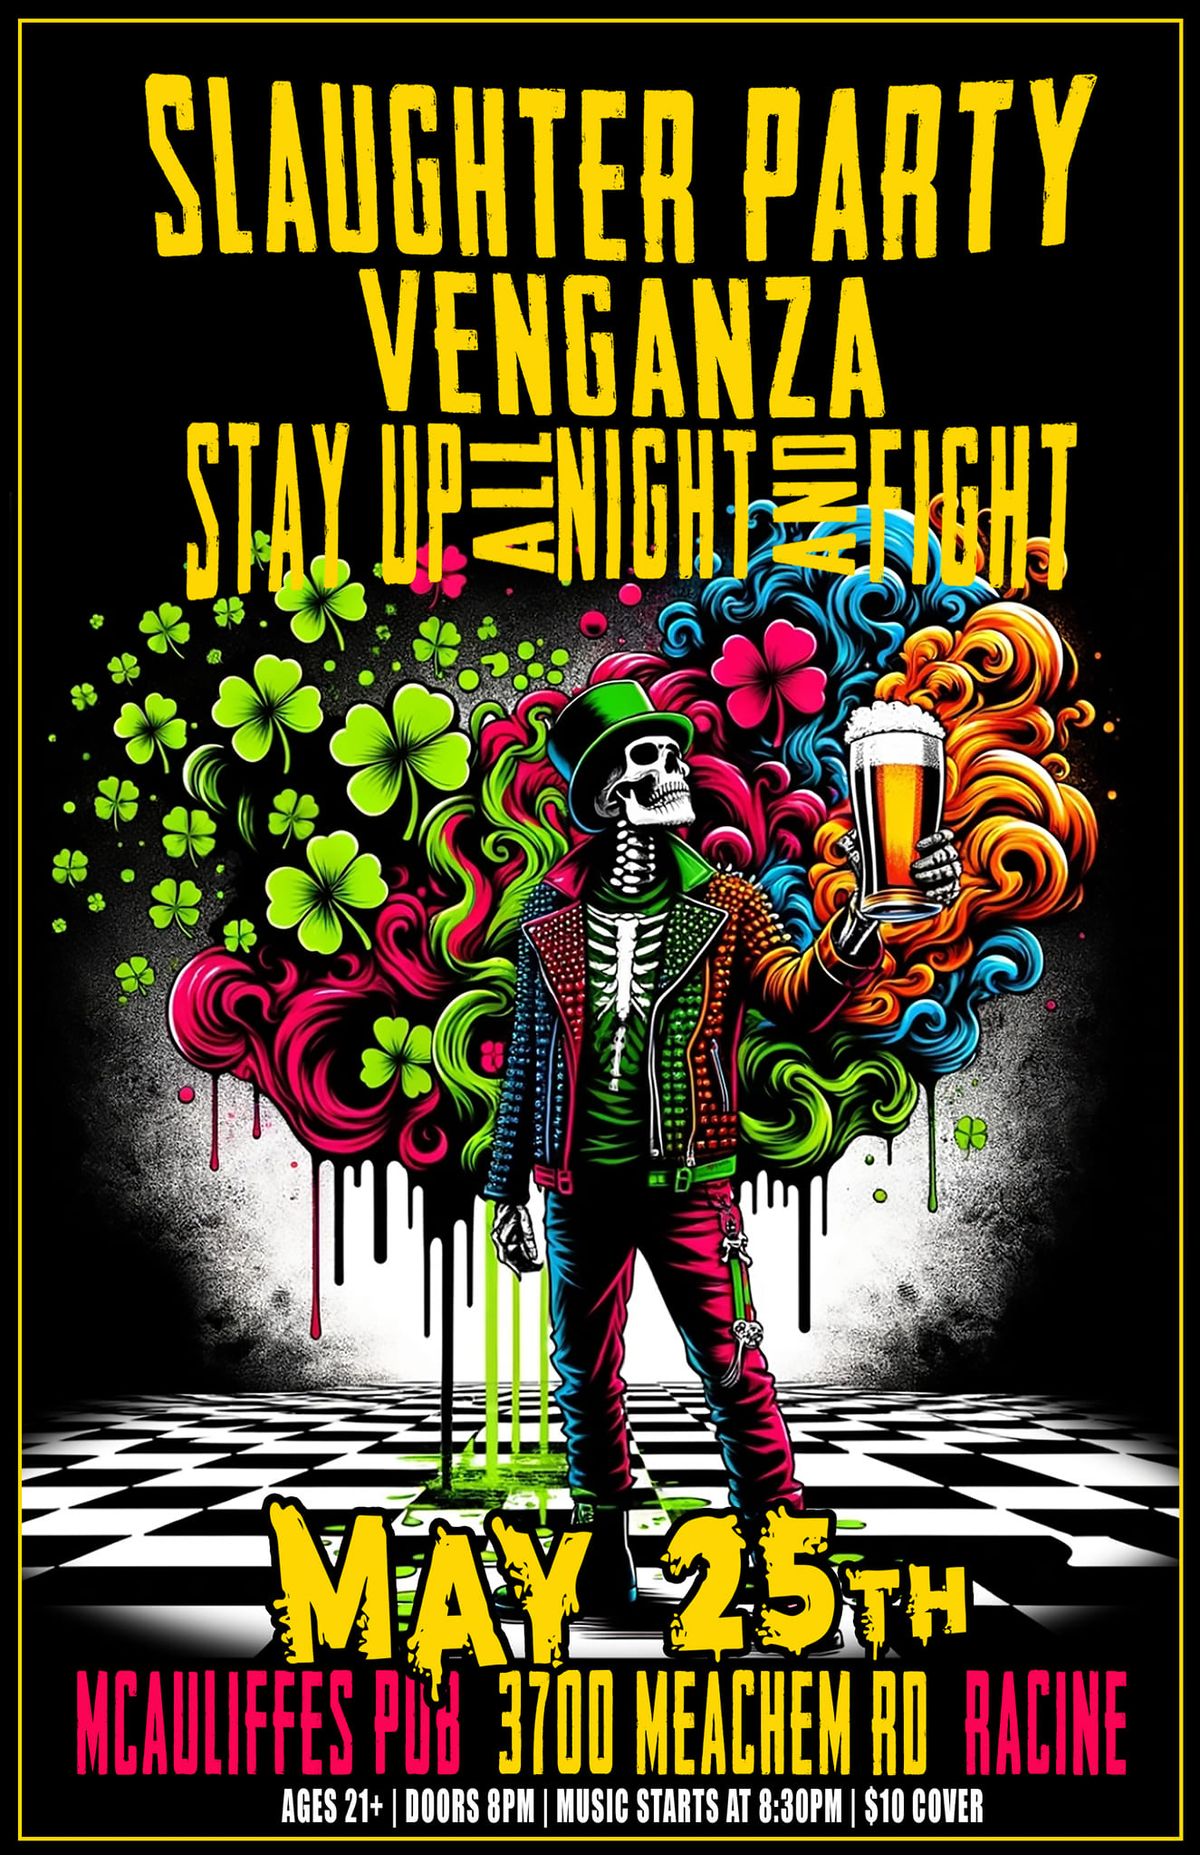 SLAUGHTER PARTY | VENGANZA | STAY UP ALL NIGHT & FIGHT @ MCAULIFFE'S PUB